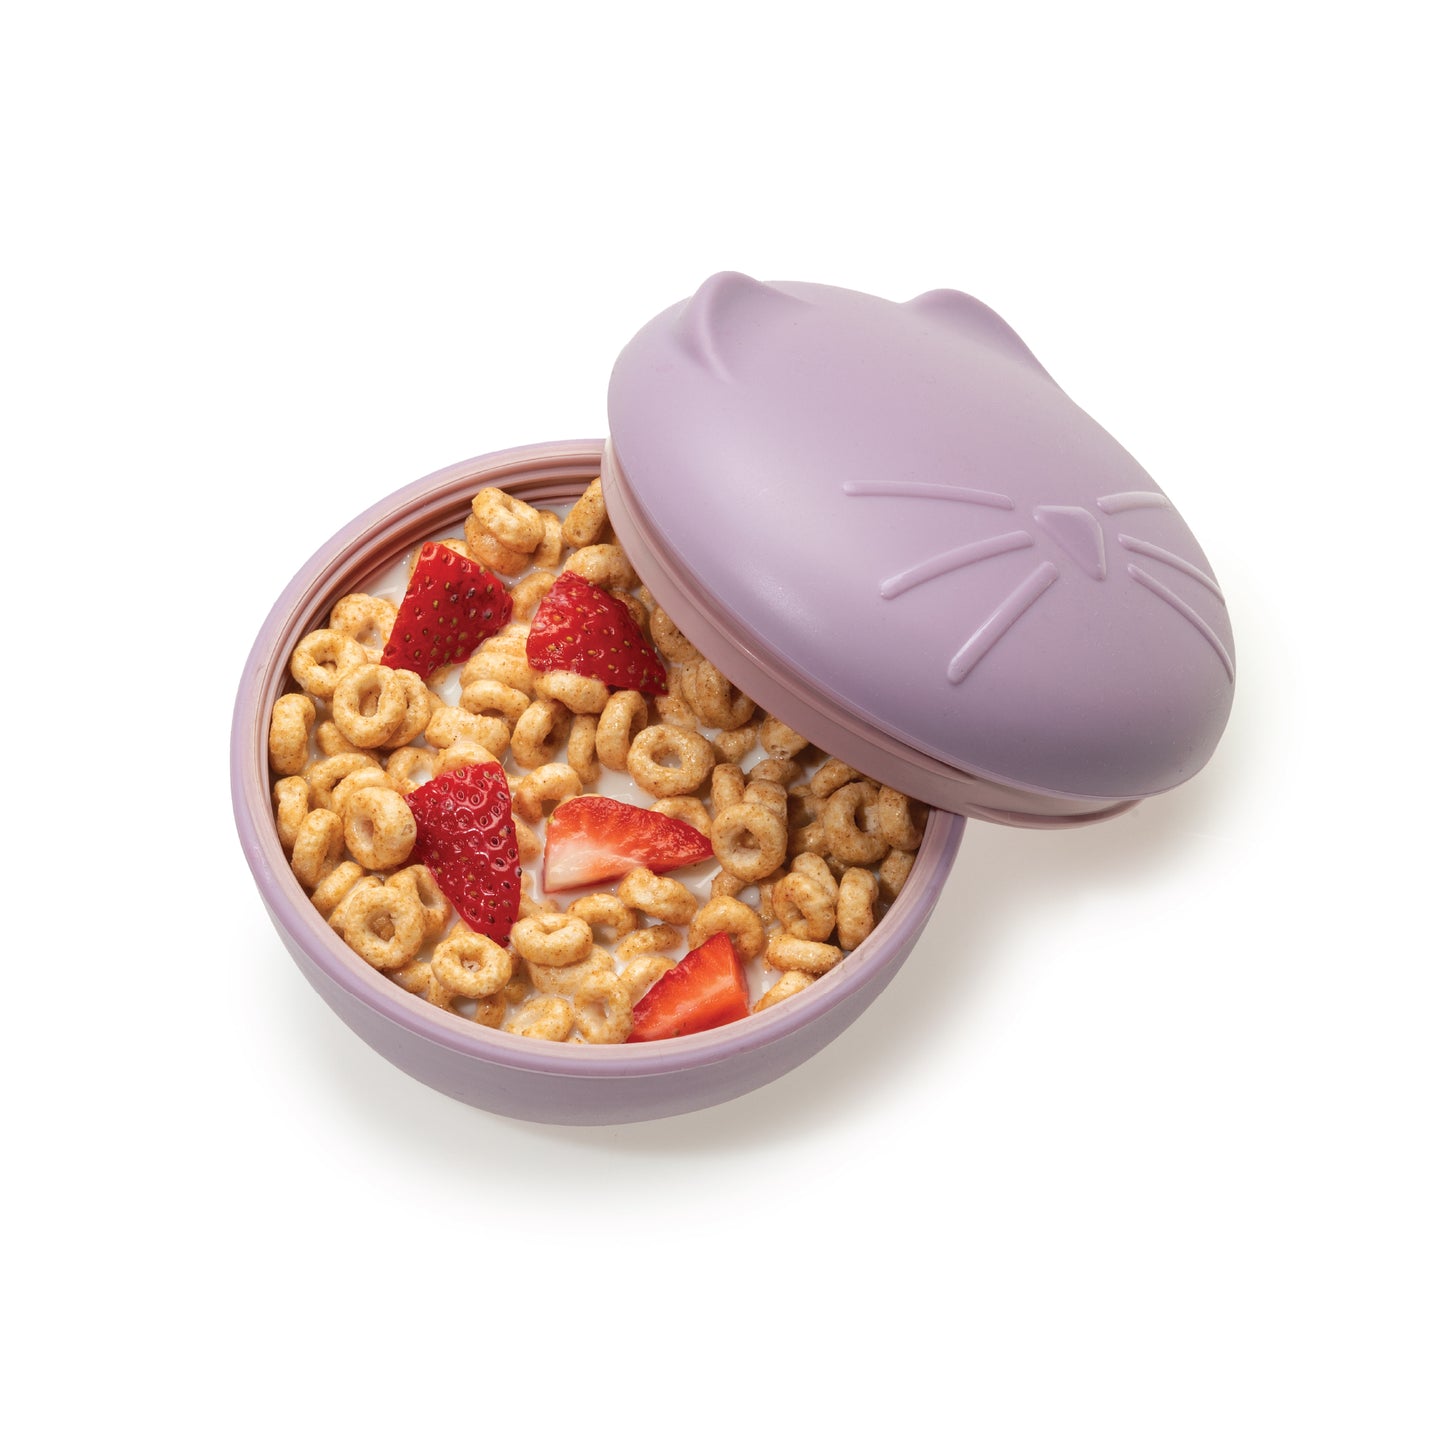 Melii Silicone Purple Cat Bowl with Lid 350 ml - Airtight, and Leakproof Food Storage for Babies, Toddlers, Kids - BPA Free, Microwave Safe, Perfect for On-the-Go Meals Snacks